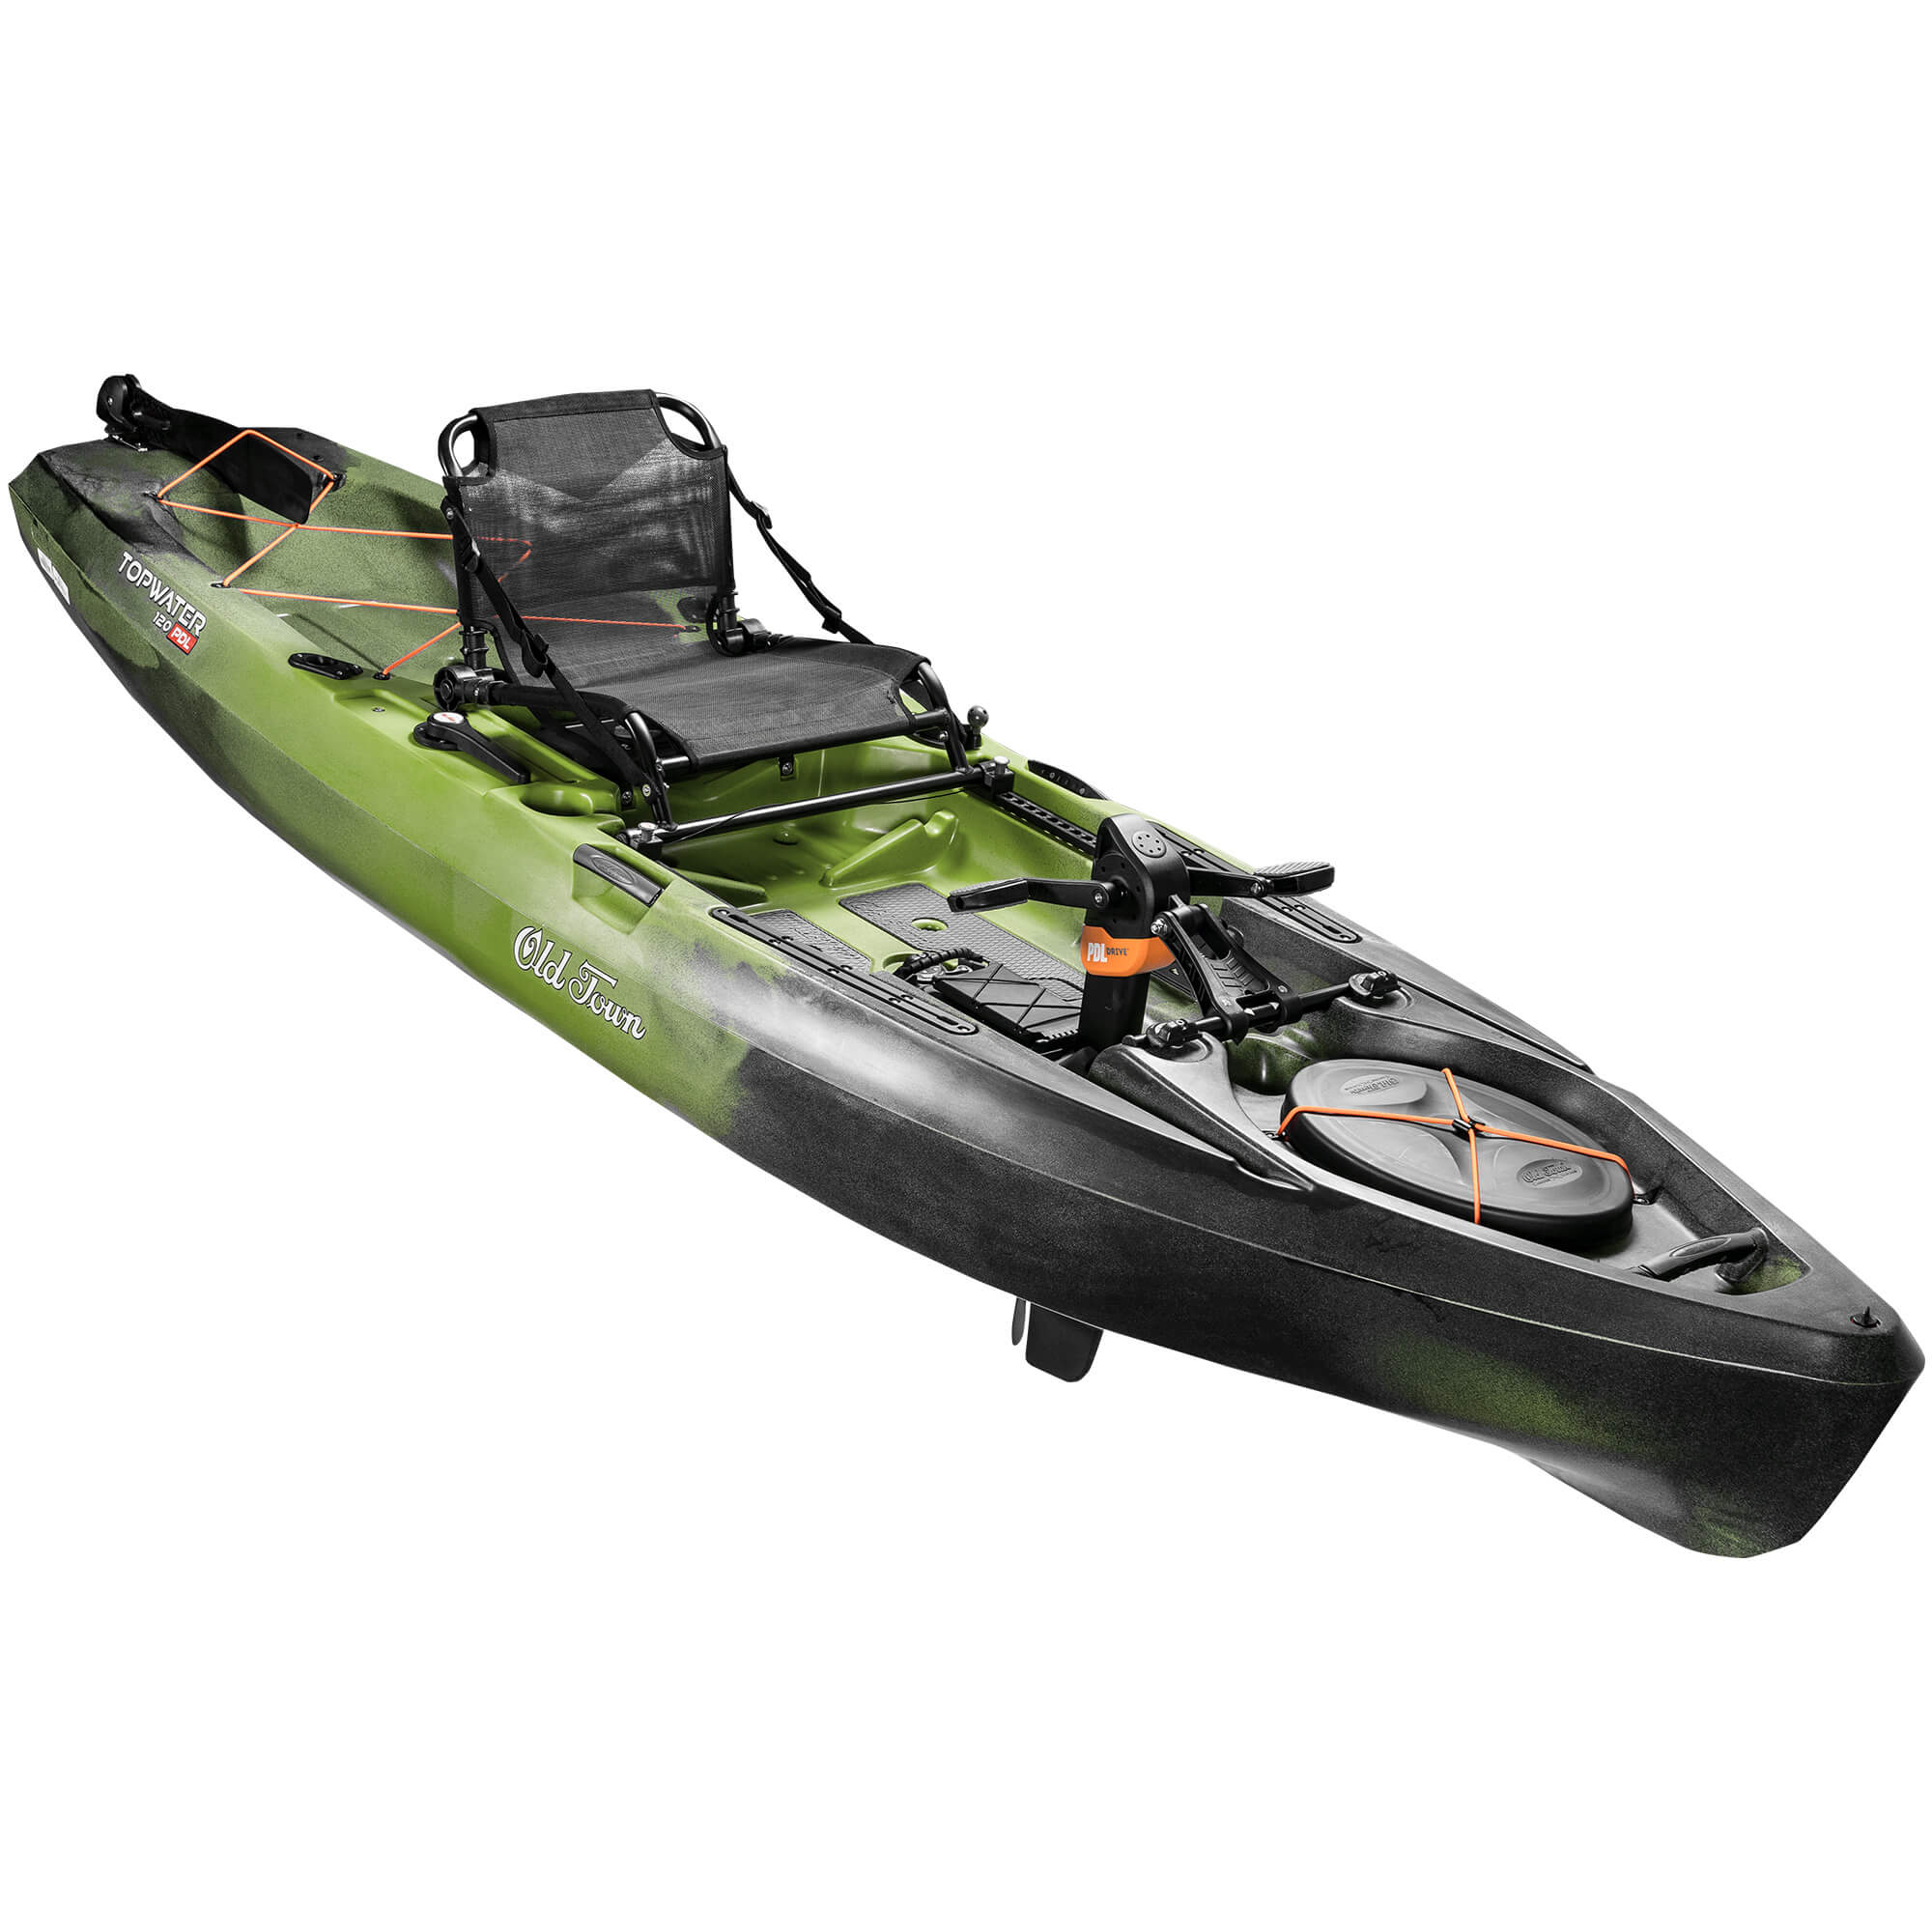 Best Fishing Kayaks: 7 boats to serve the needs of any angler